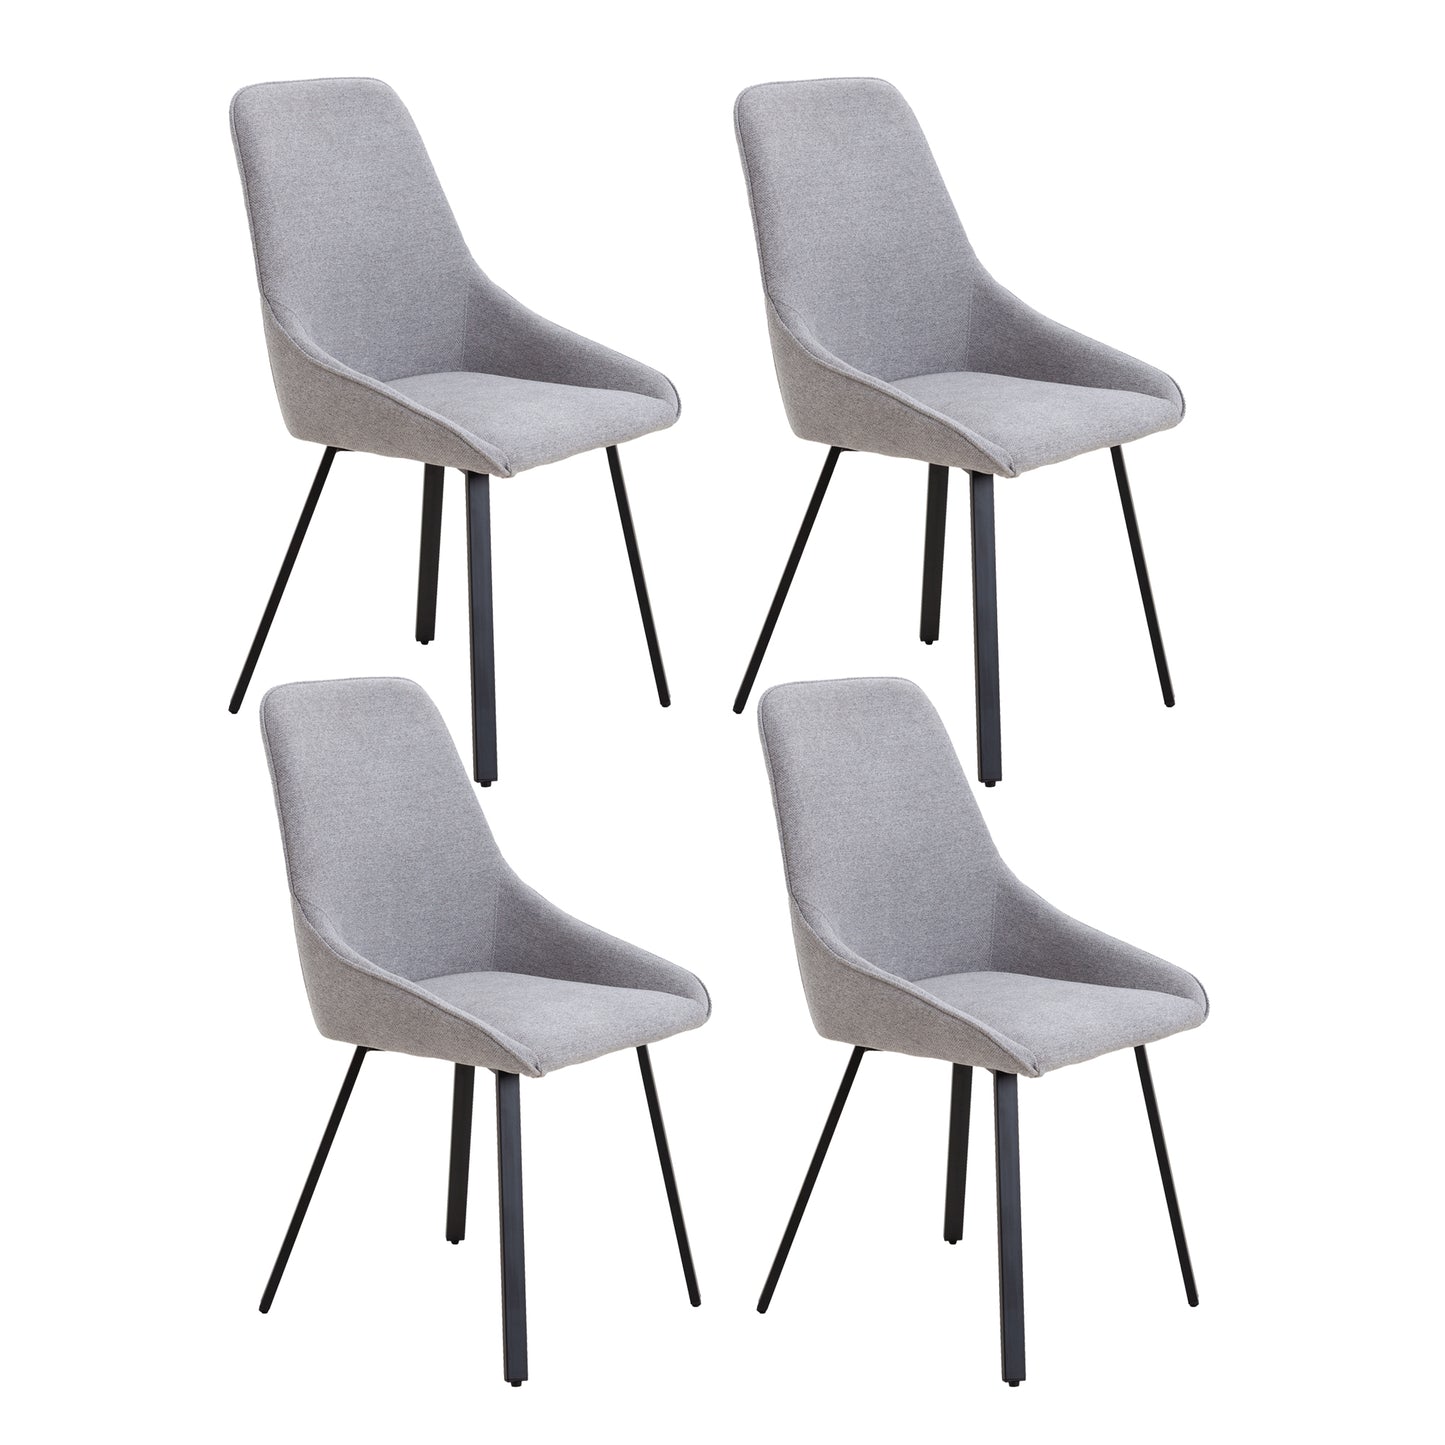 Justone Modern Linen Dining Side Chairs Set of 4 Gray